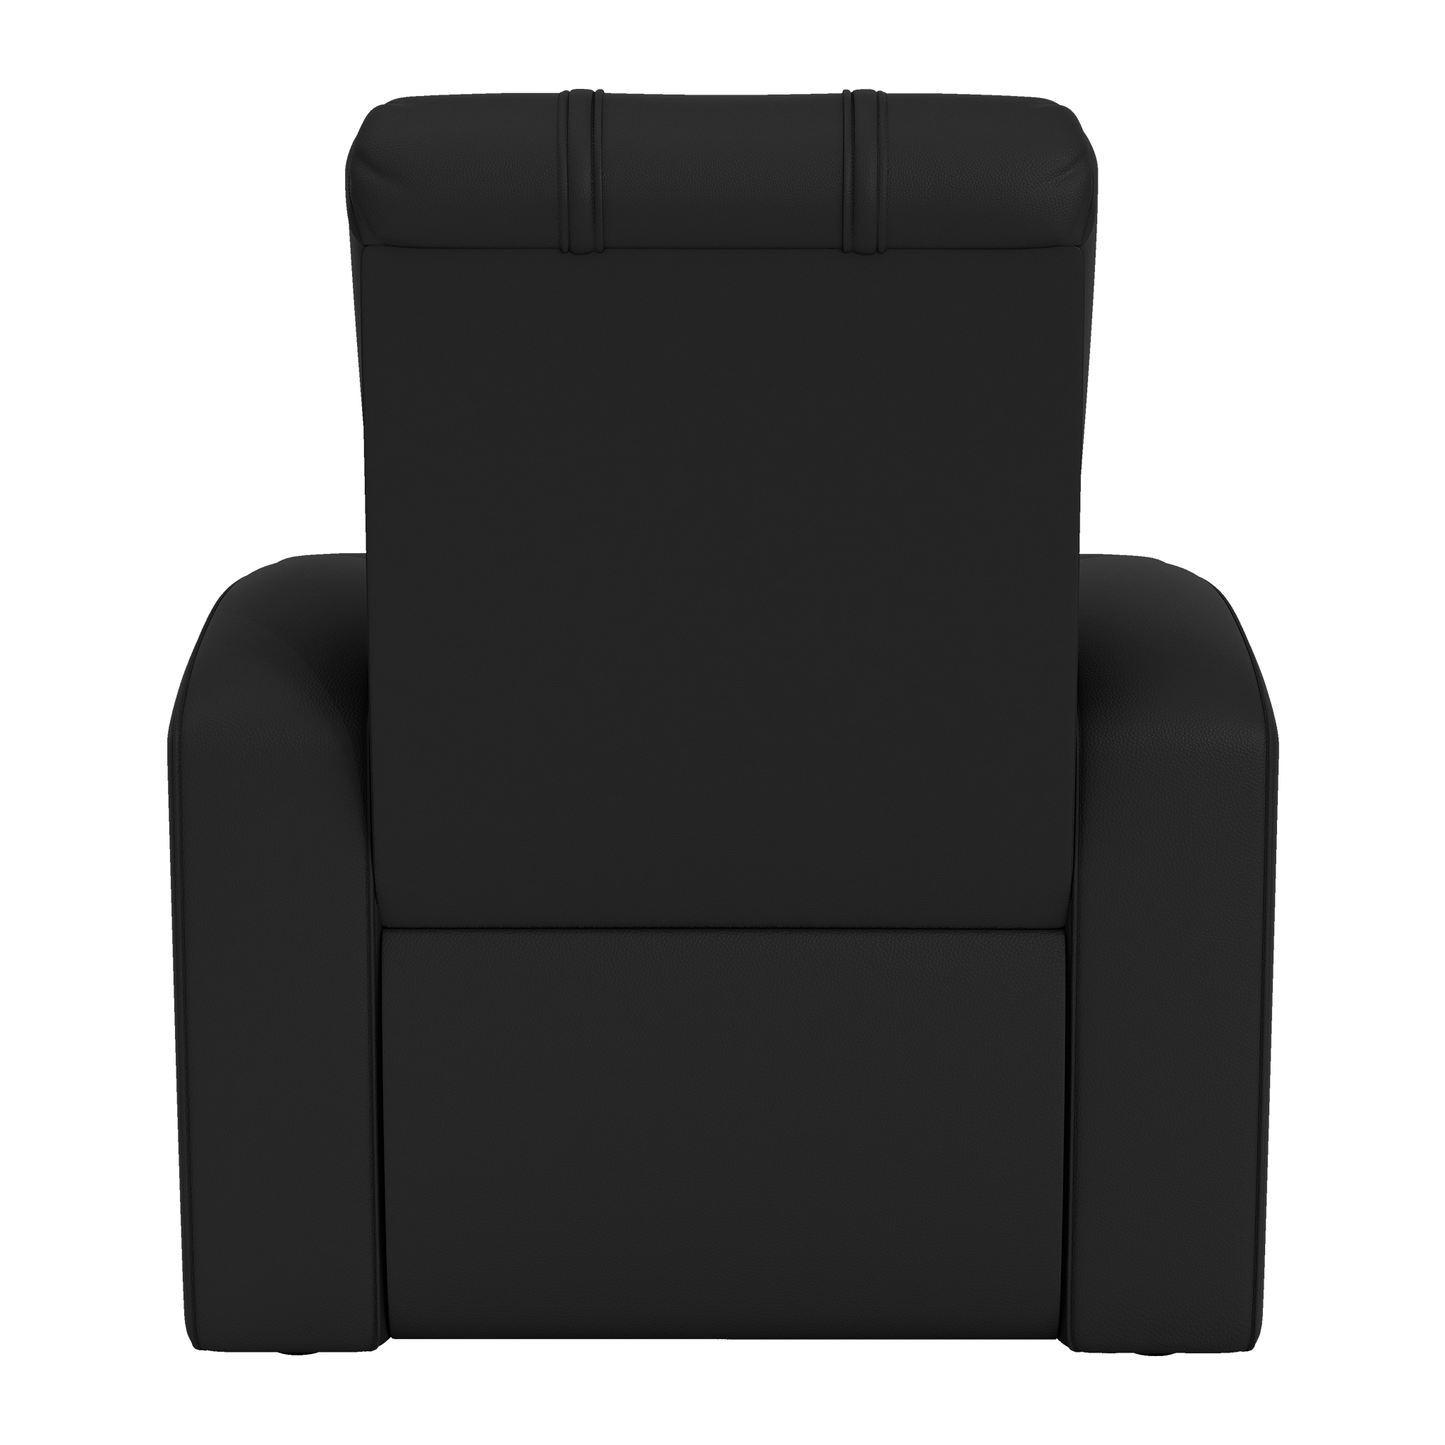 Relax Home Theater Recliner with Pittsburgh Pirates Cooperstown